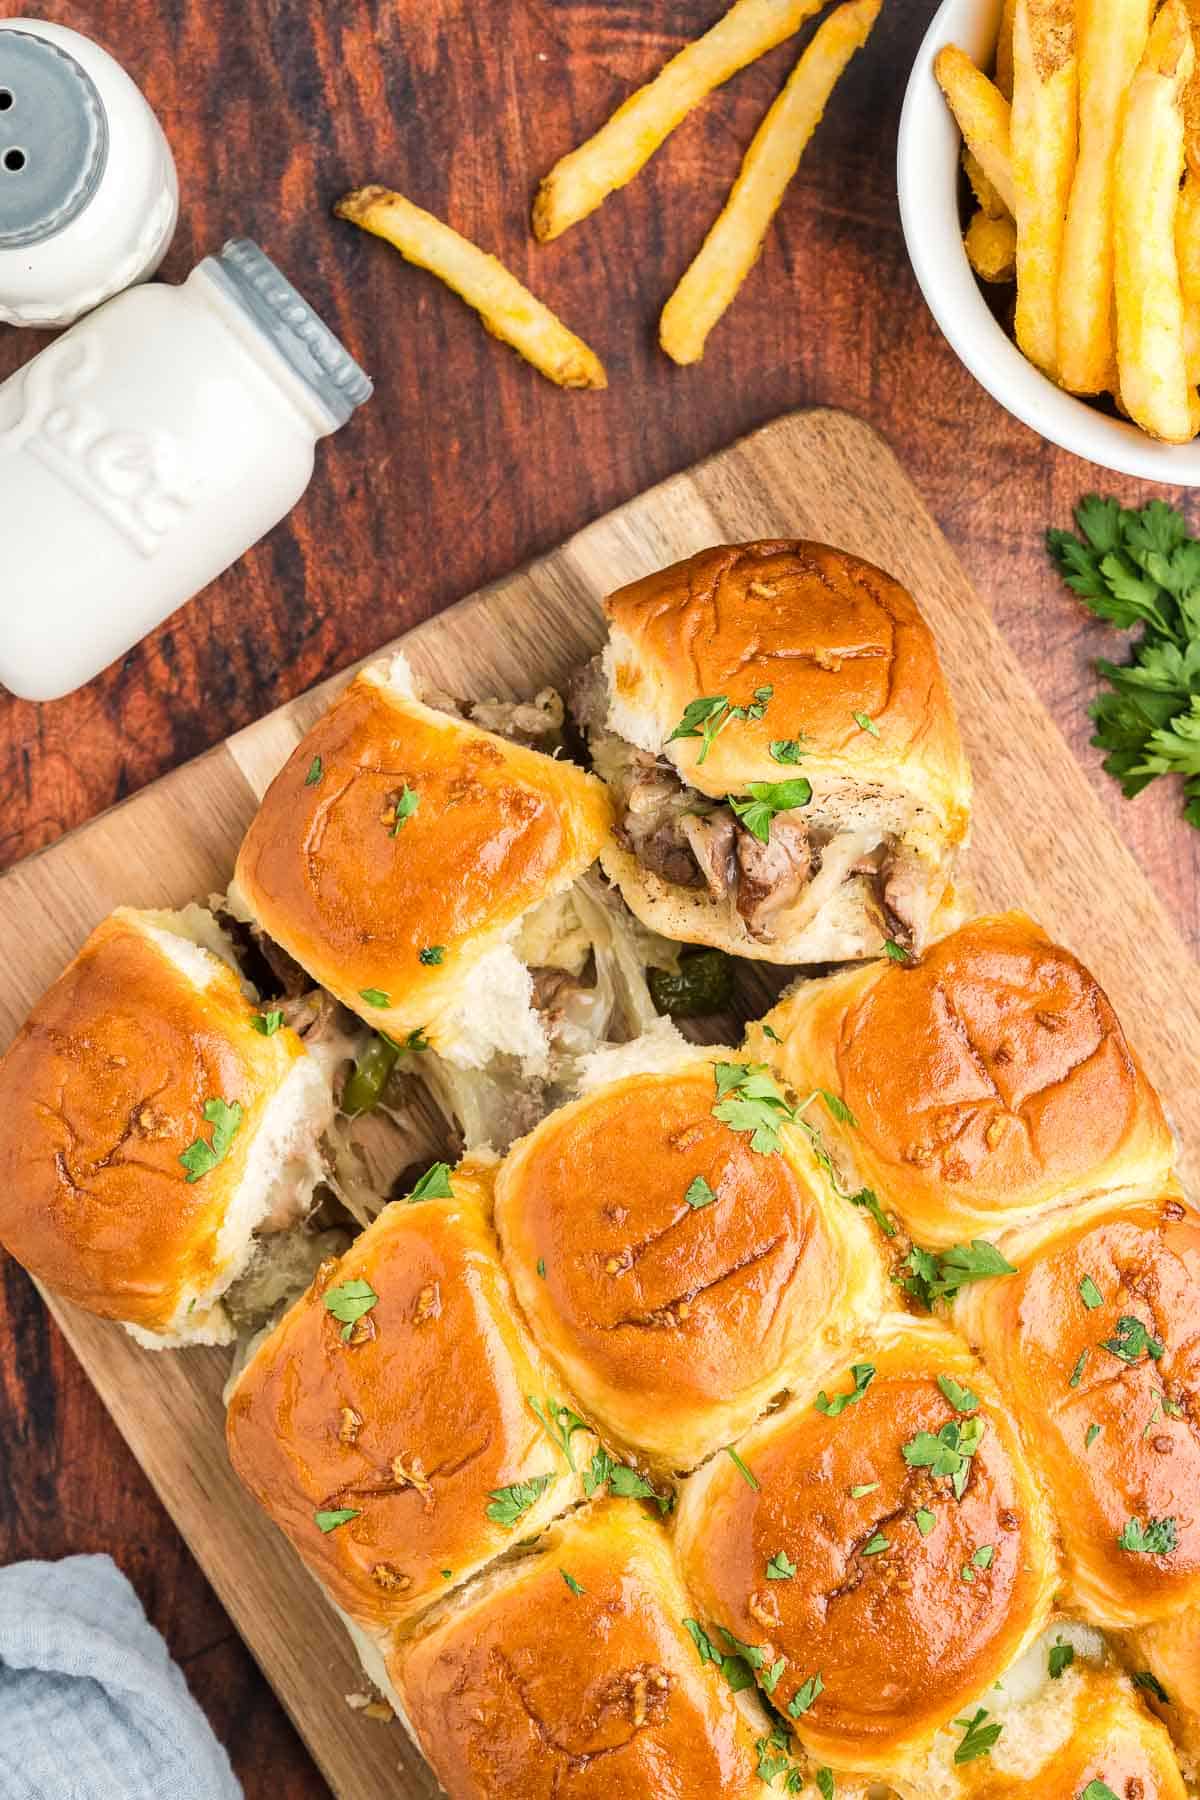 Philly cheesesteak sliders topped with fresh parsley and served with french fries.